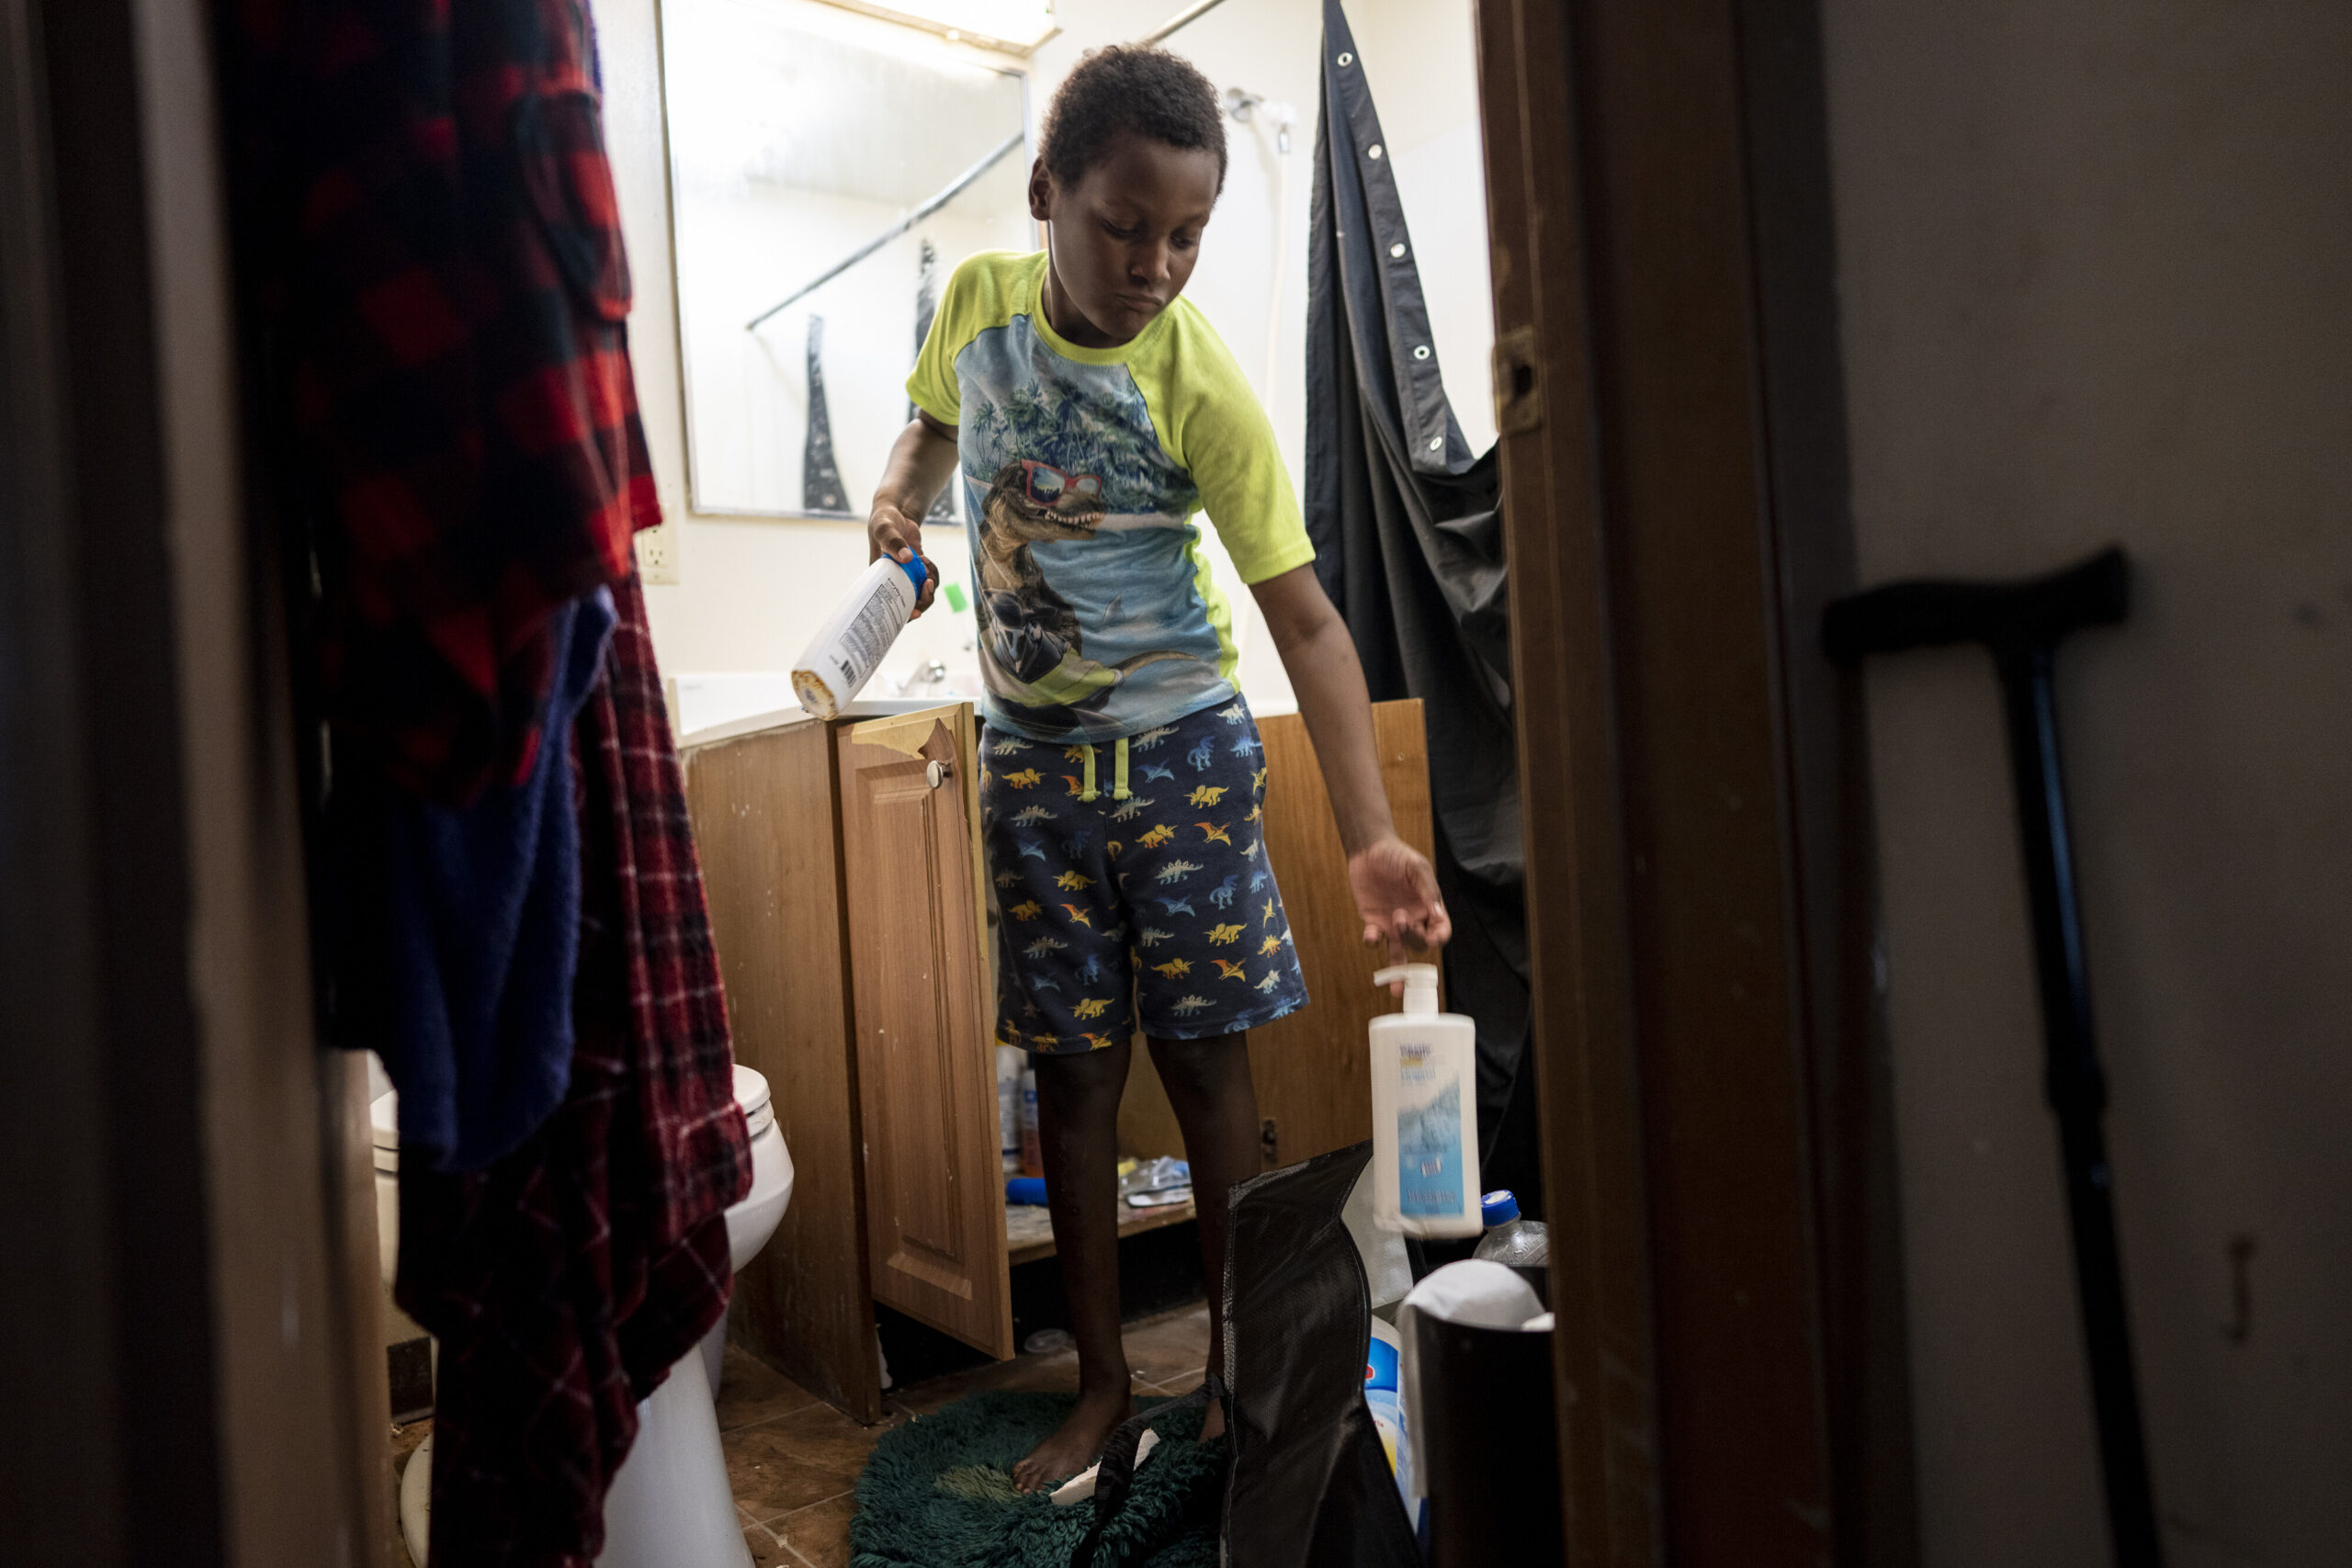 Aiden Branch, 9, packs up items from the bathroom of the one bedroom apartment he lives in with his mom and two siblings on Saturday July 1, 2023 in Milwaukee, Wis. Aidan suffered lead poisoning in the apartment they lived previously and has hyperactivity